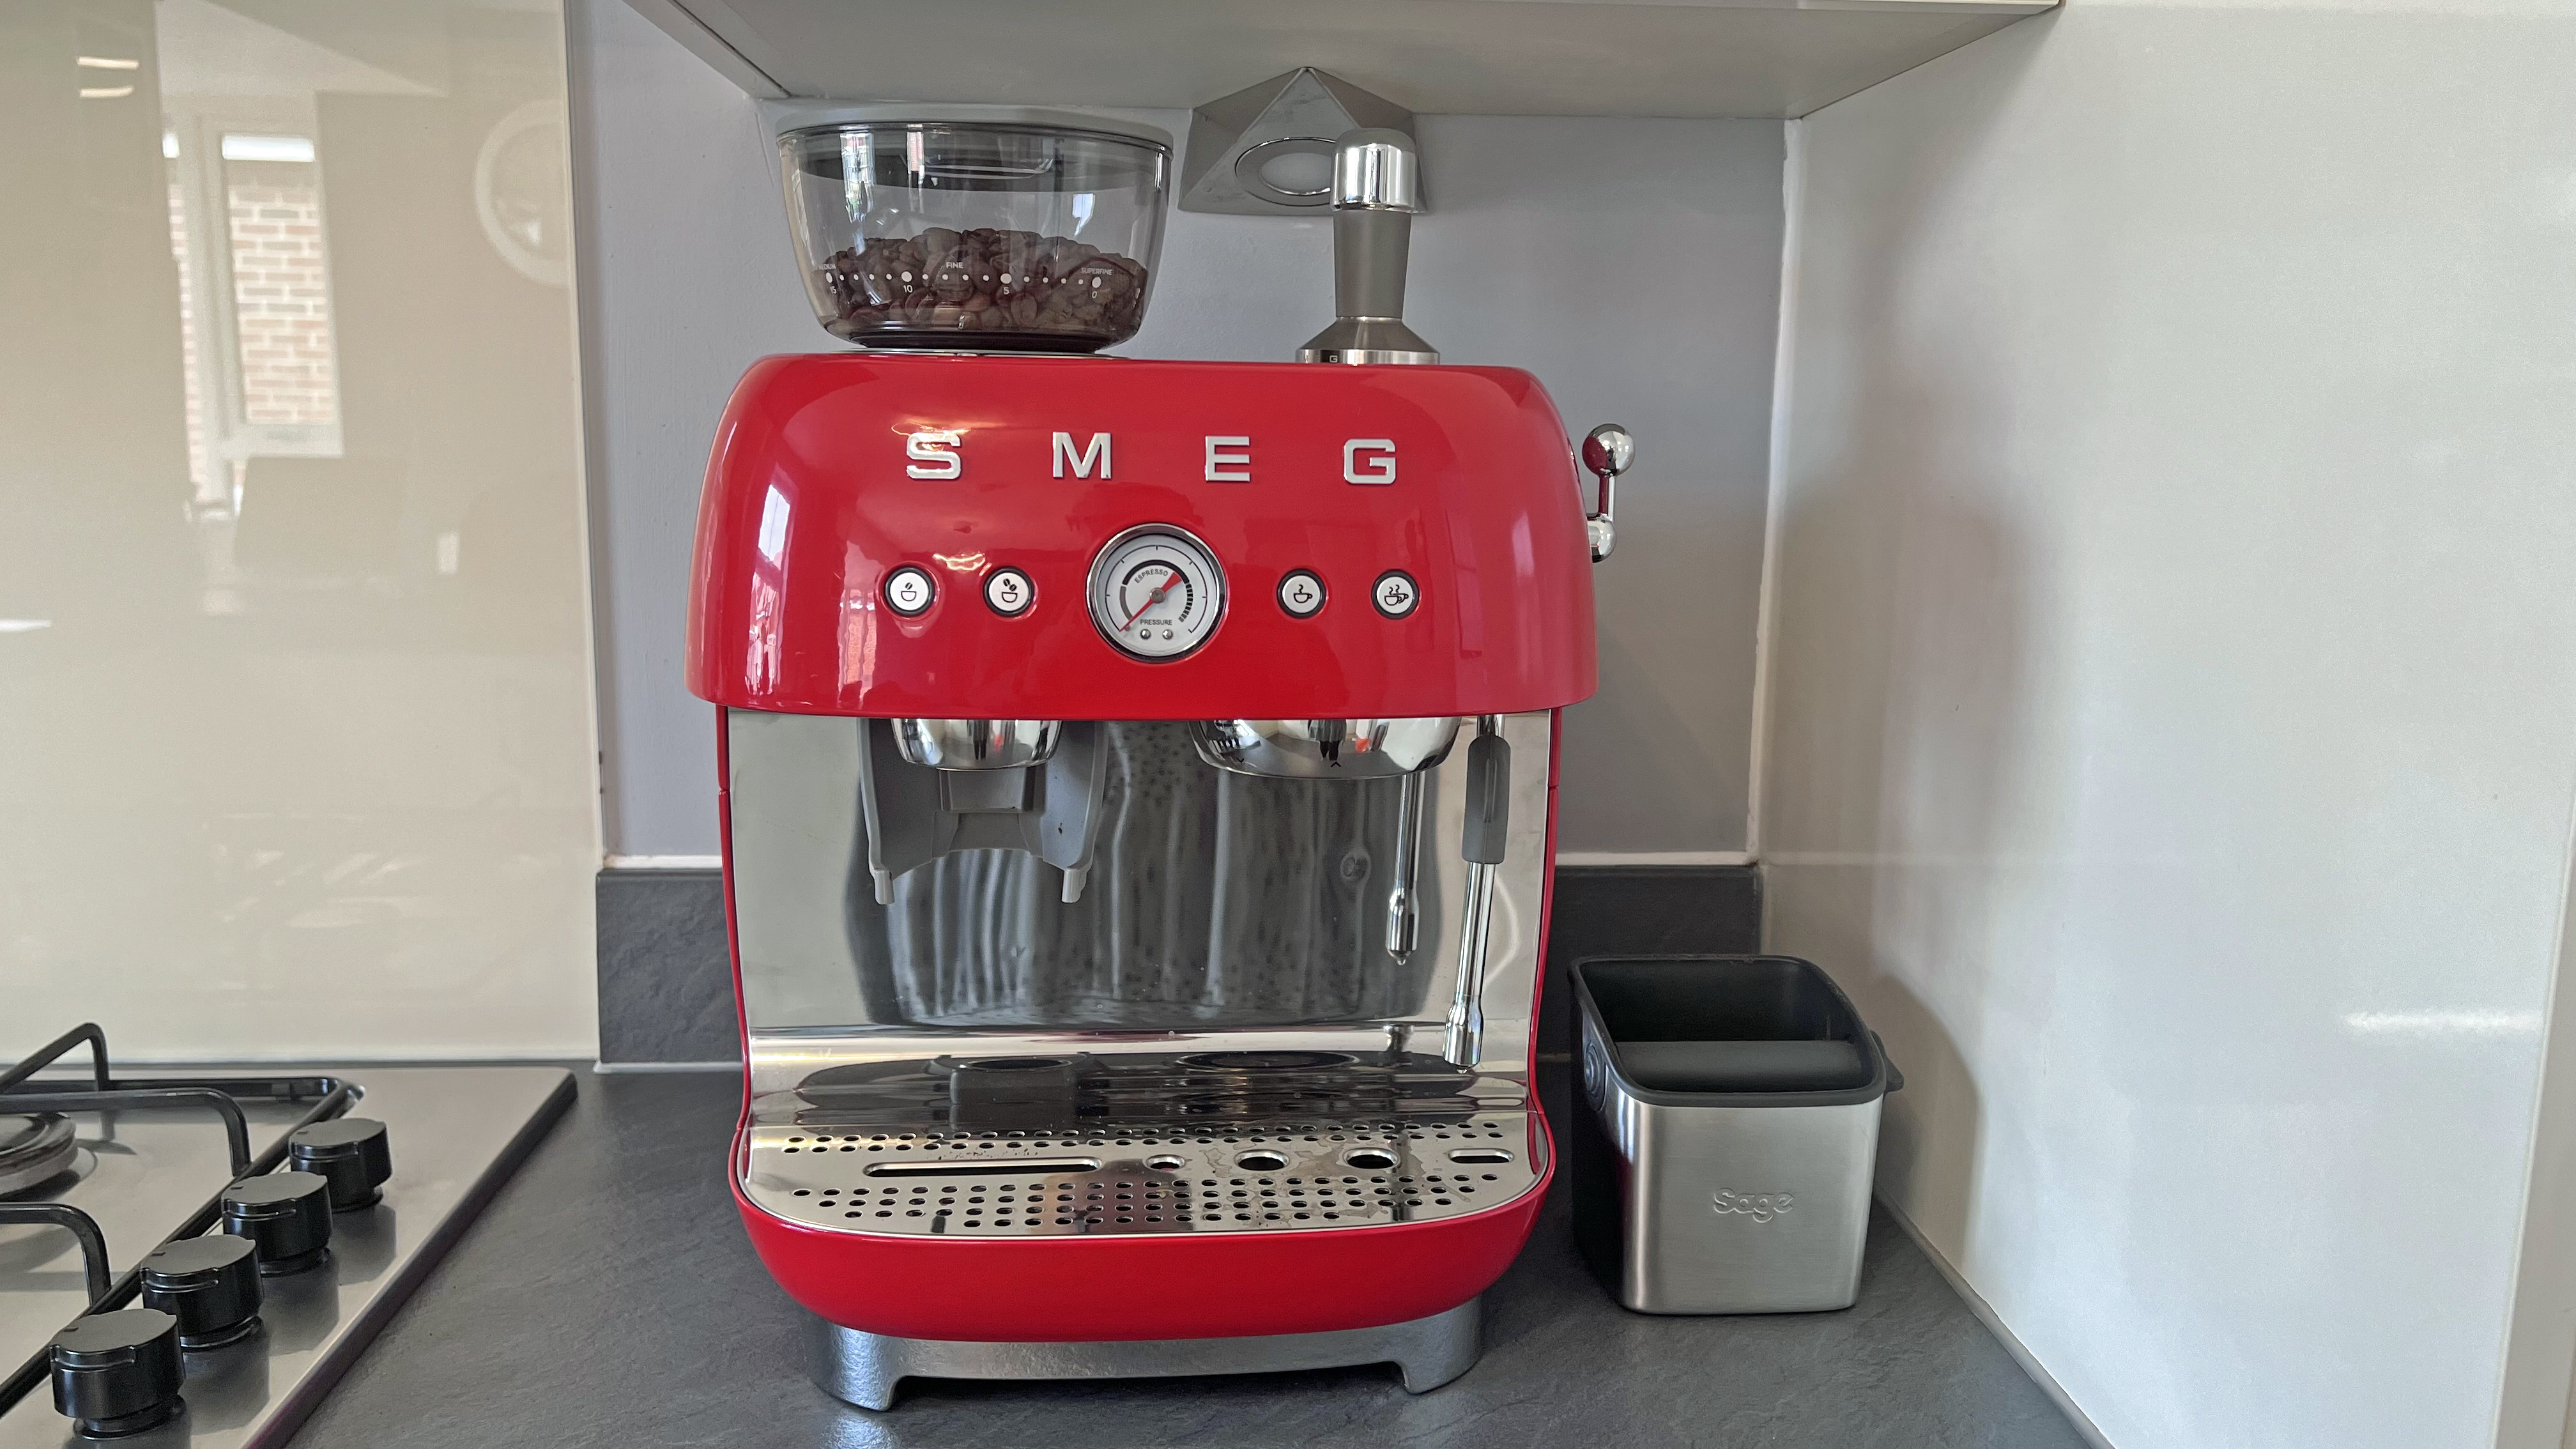 Smeg appliance reviews - is it worth buying them in the sales?